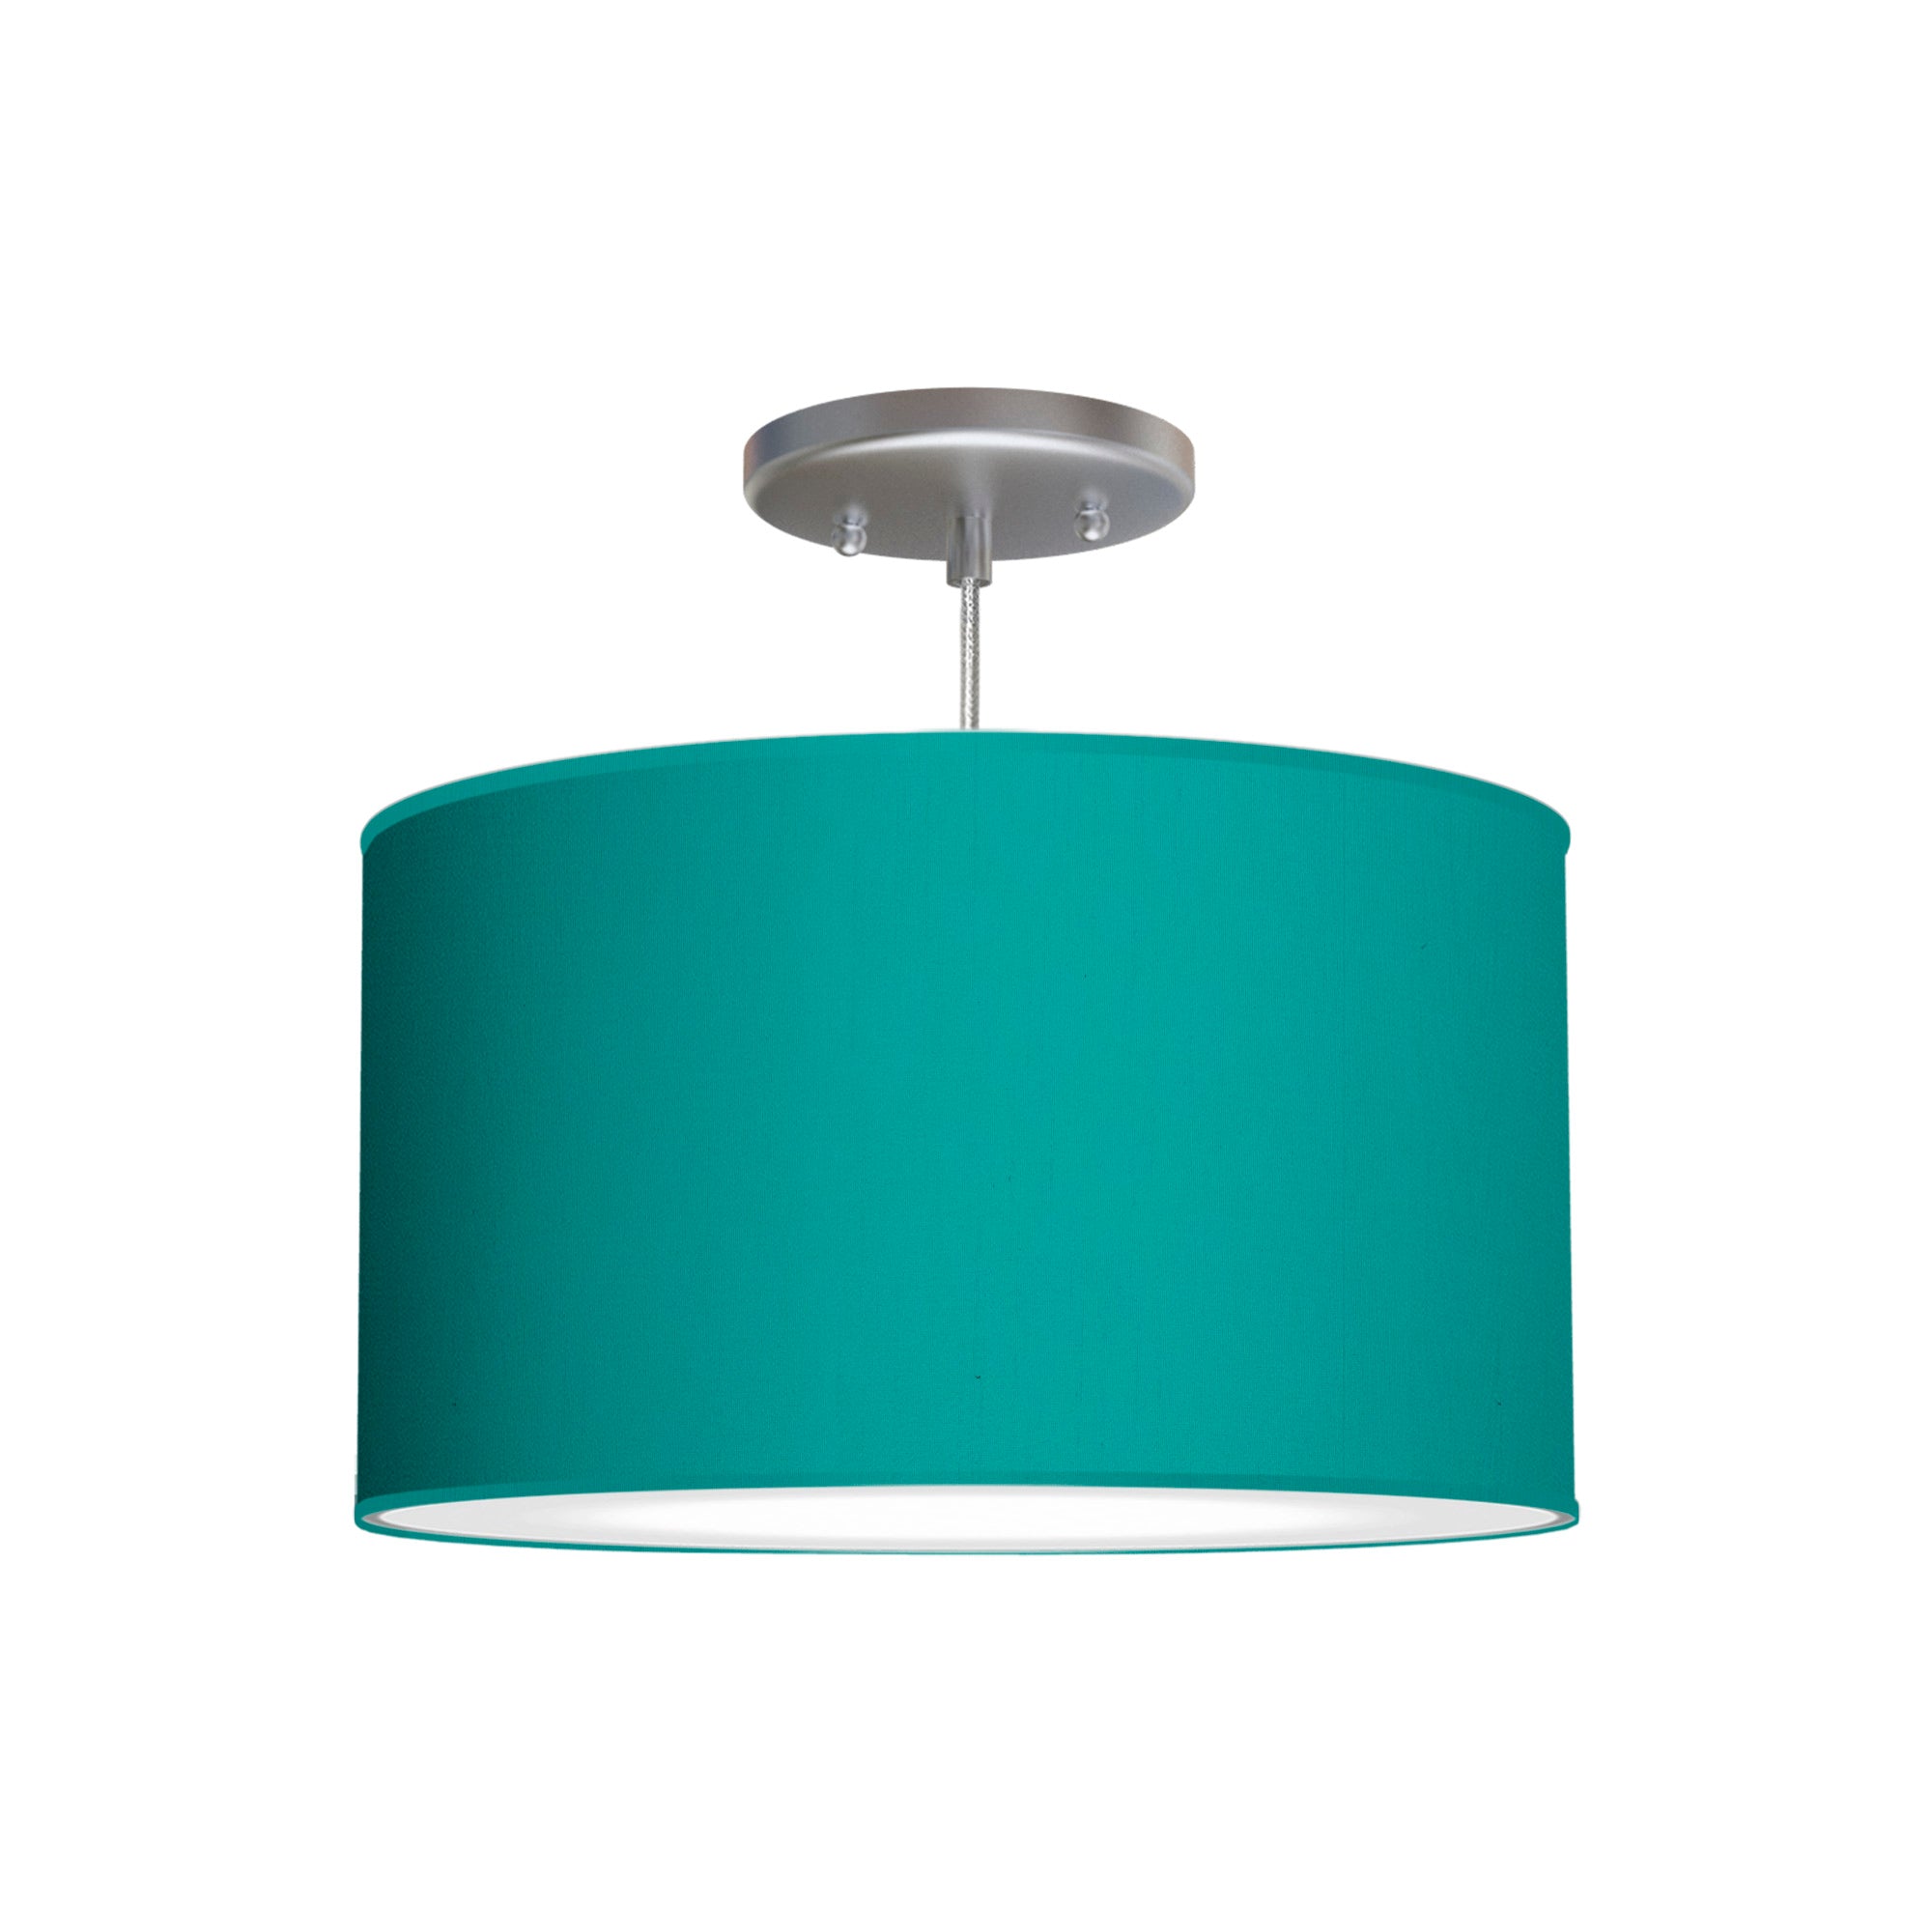 The Gab Hanging Lamp from Seascape Fixtures with a silk shade in turquoise color.